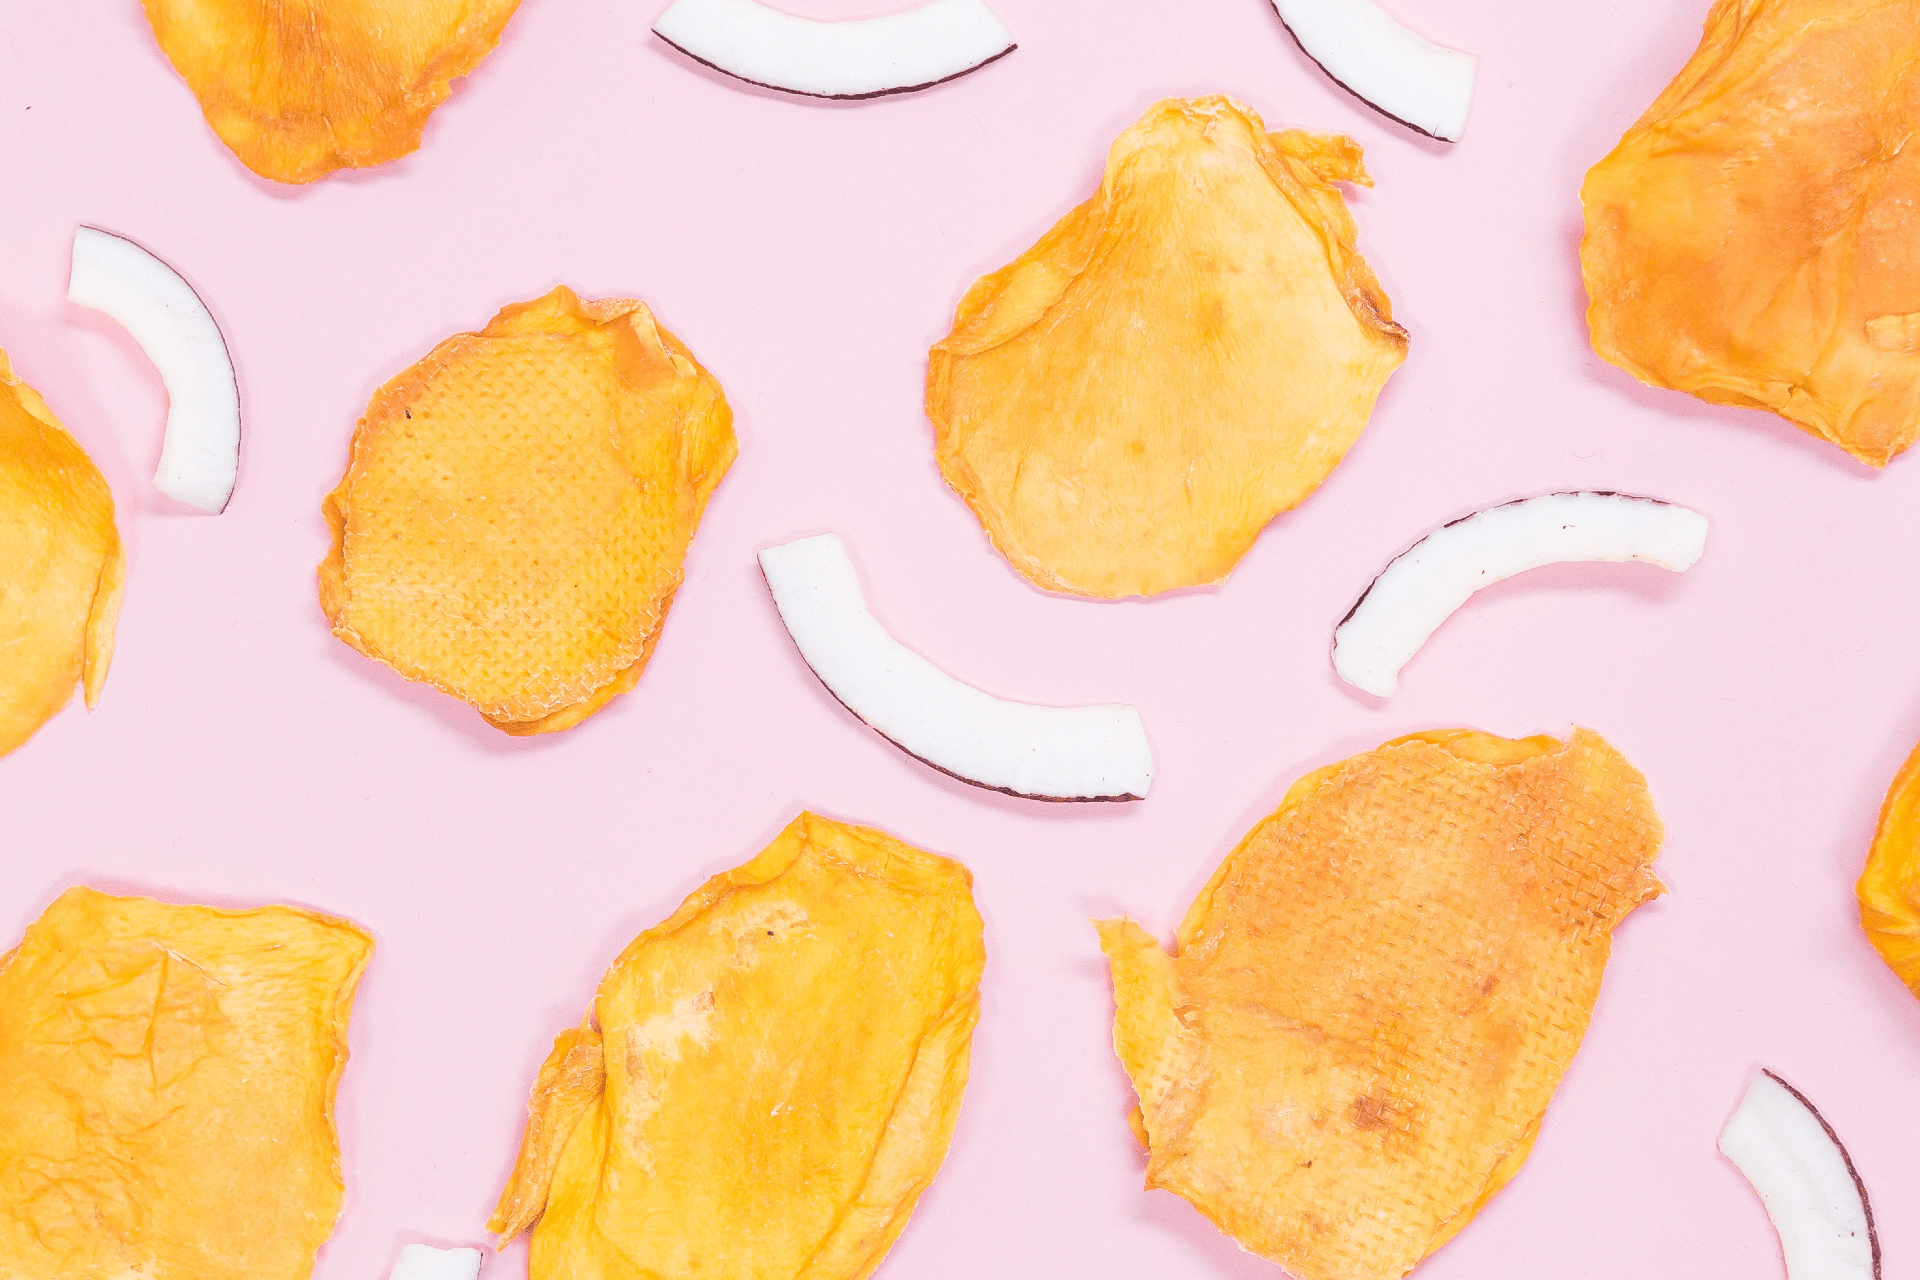 dried fruit on a pink background